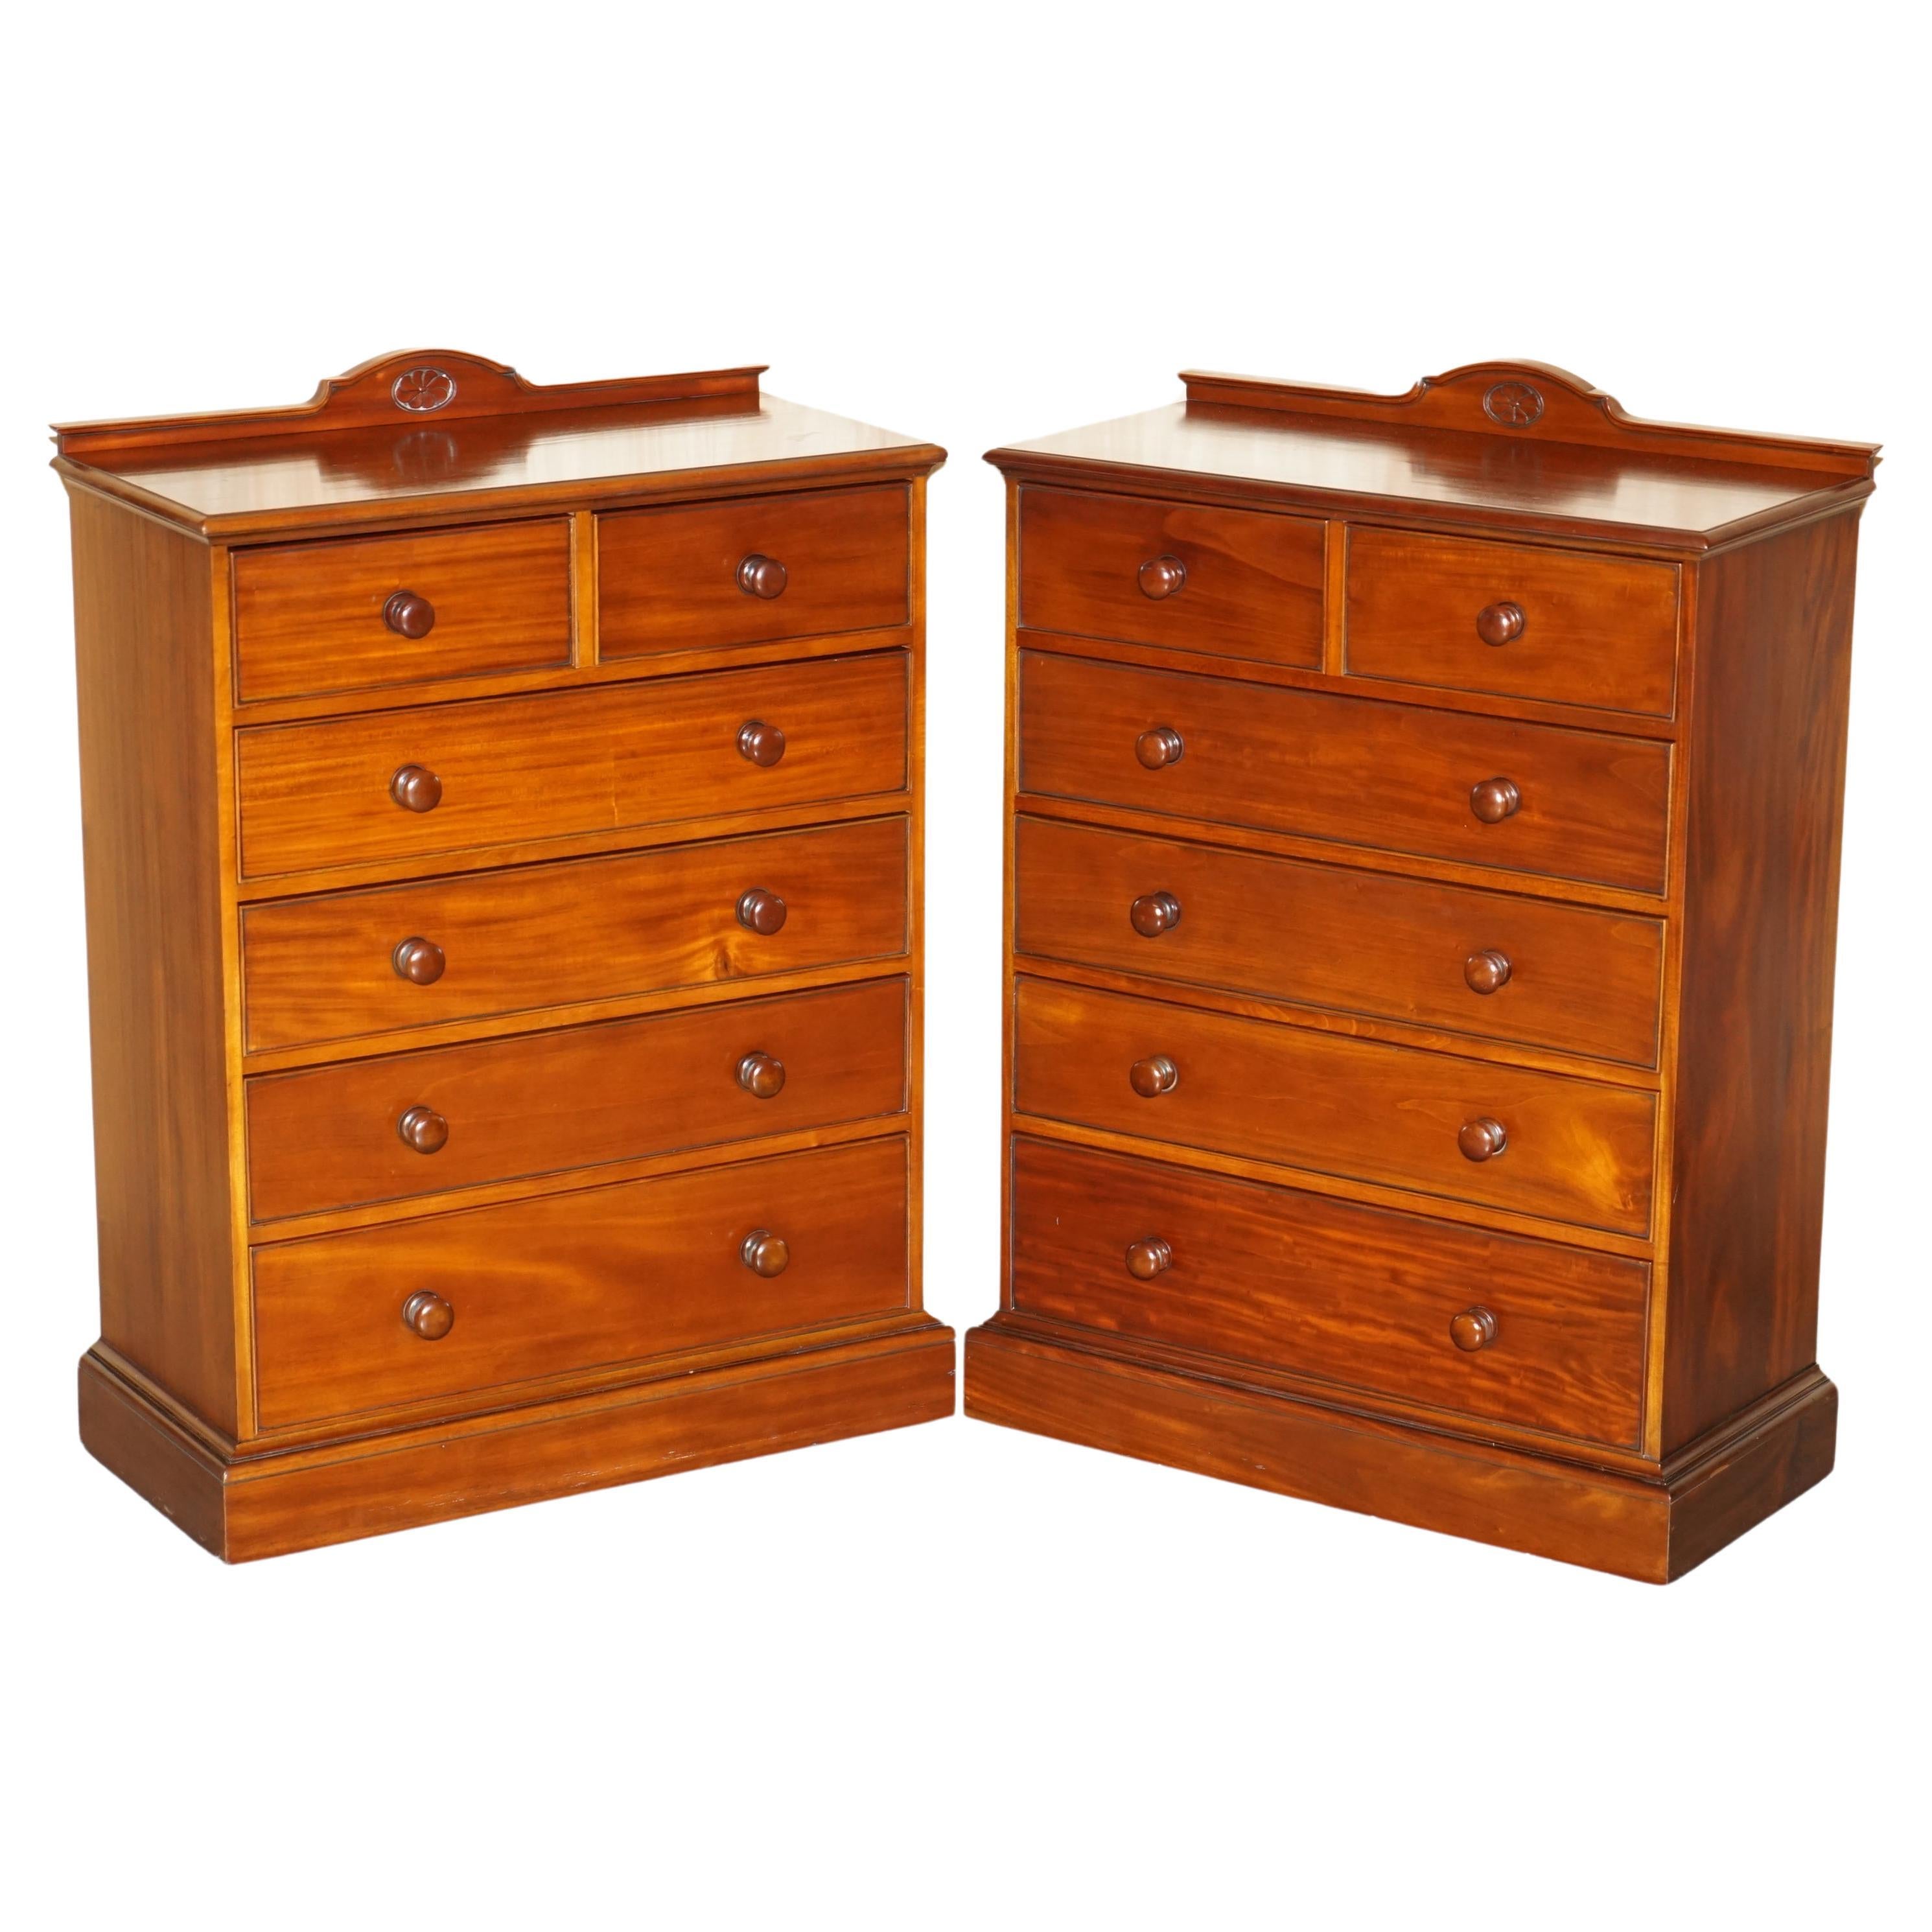 EXQUISITE PAIR OF ViNTAGE FLAMED HARDWOOD CHEST OF DRAWERS PART OF A SUITE For Sale